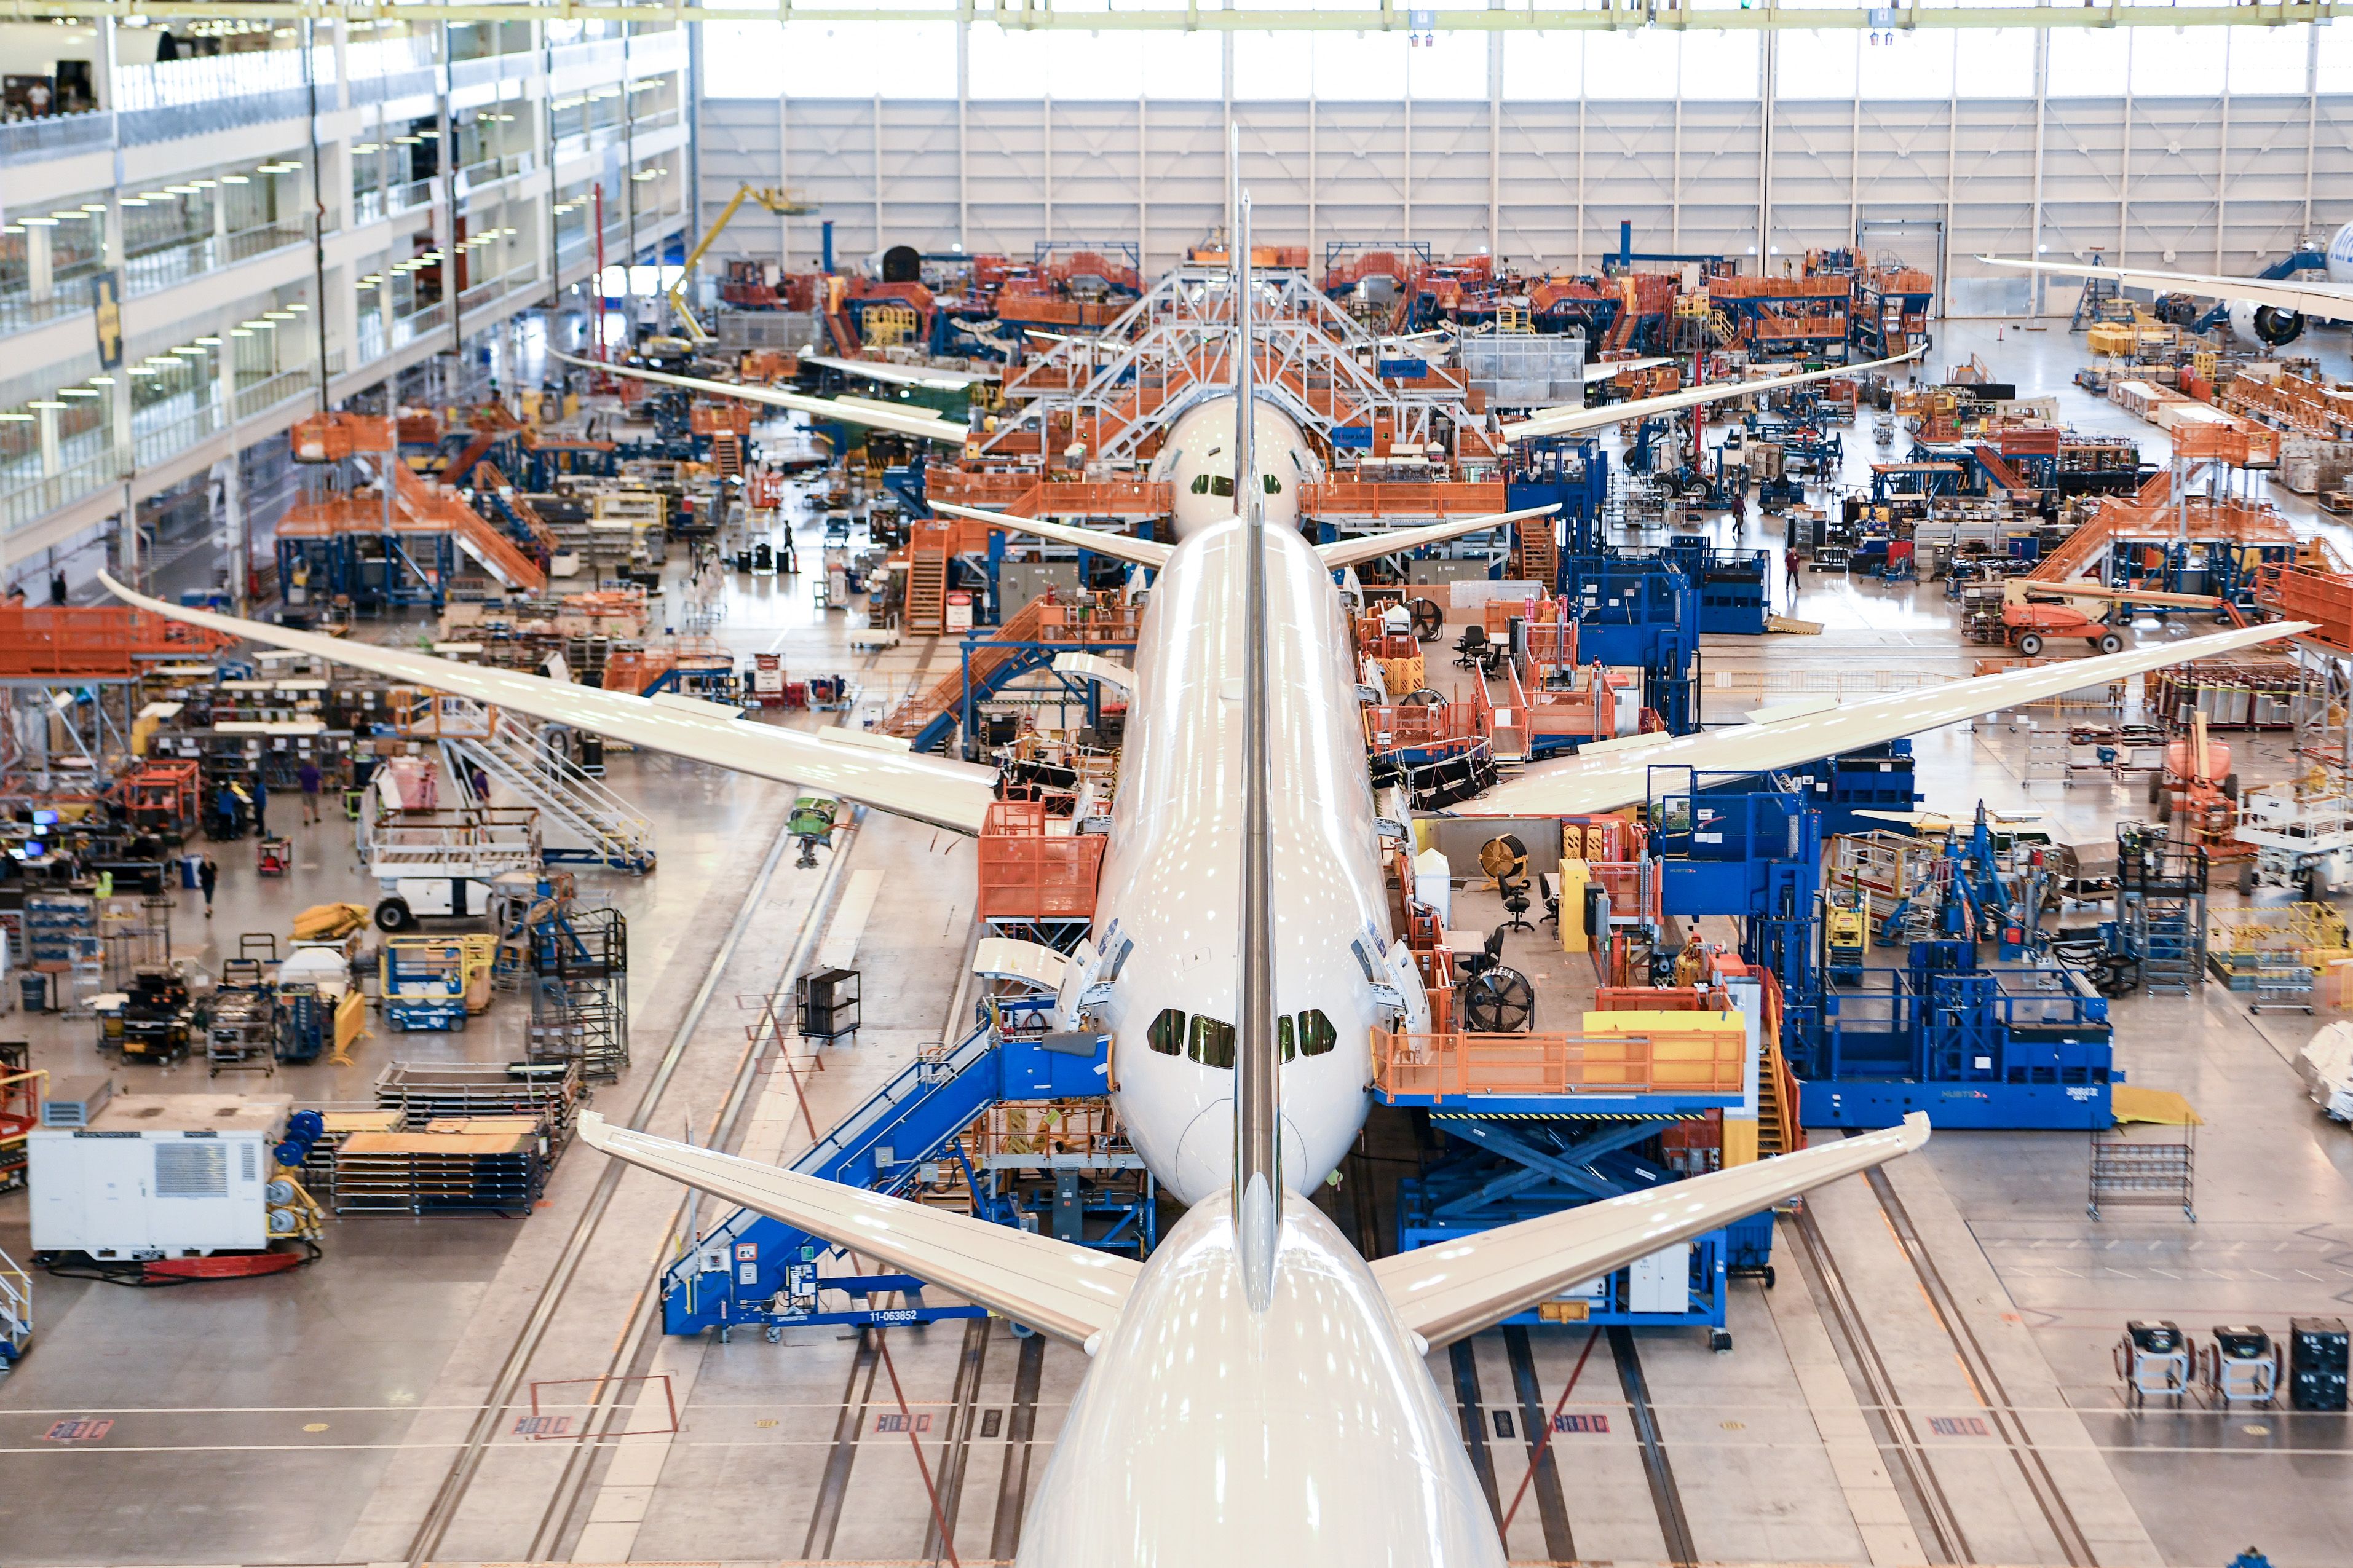 Boeing 787 final assembly Photo: Boeing